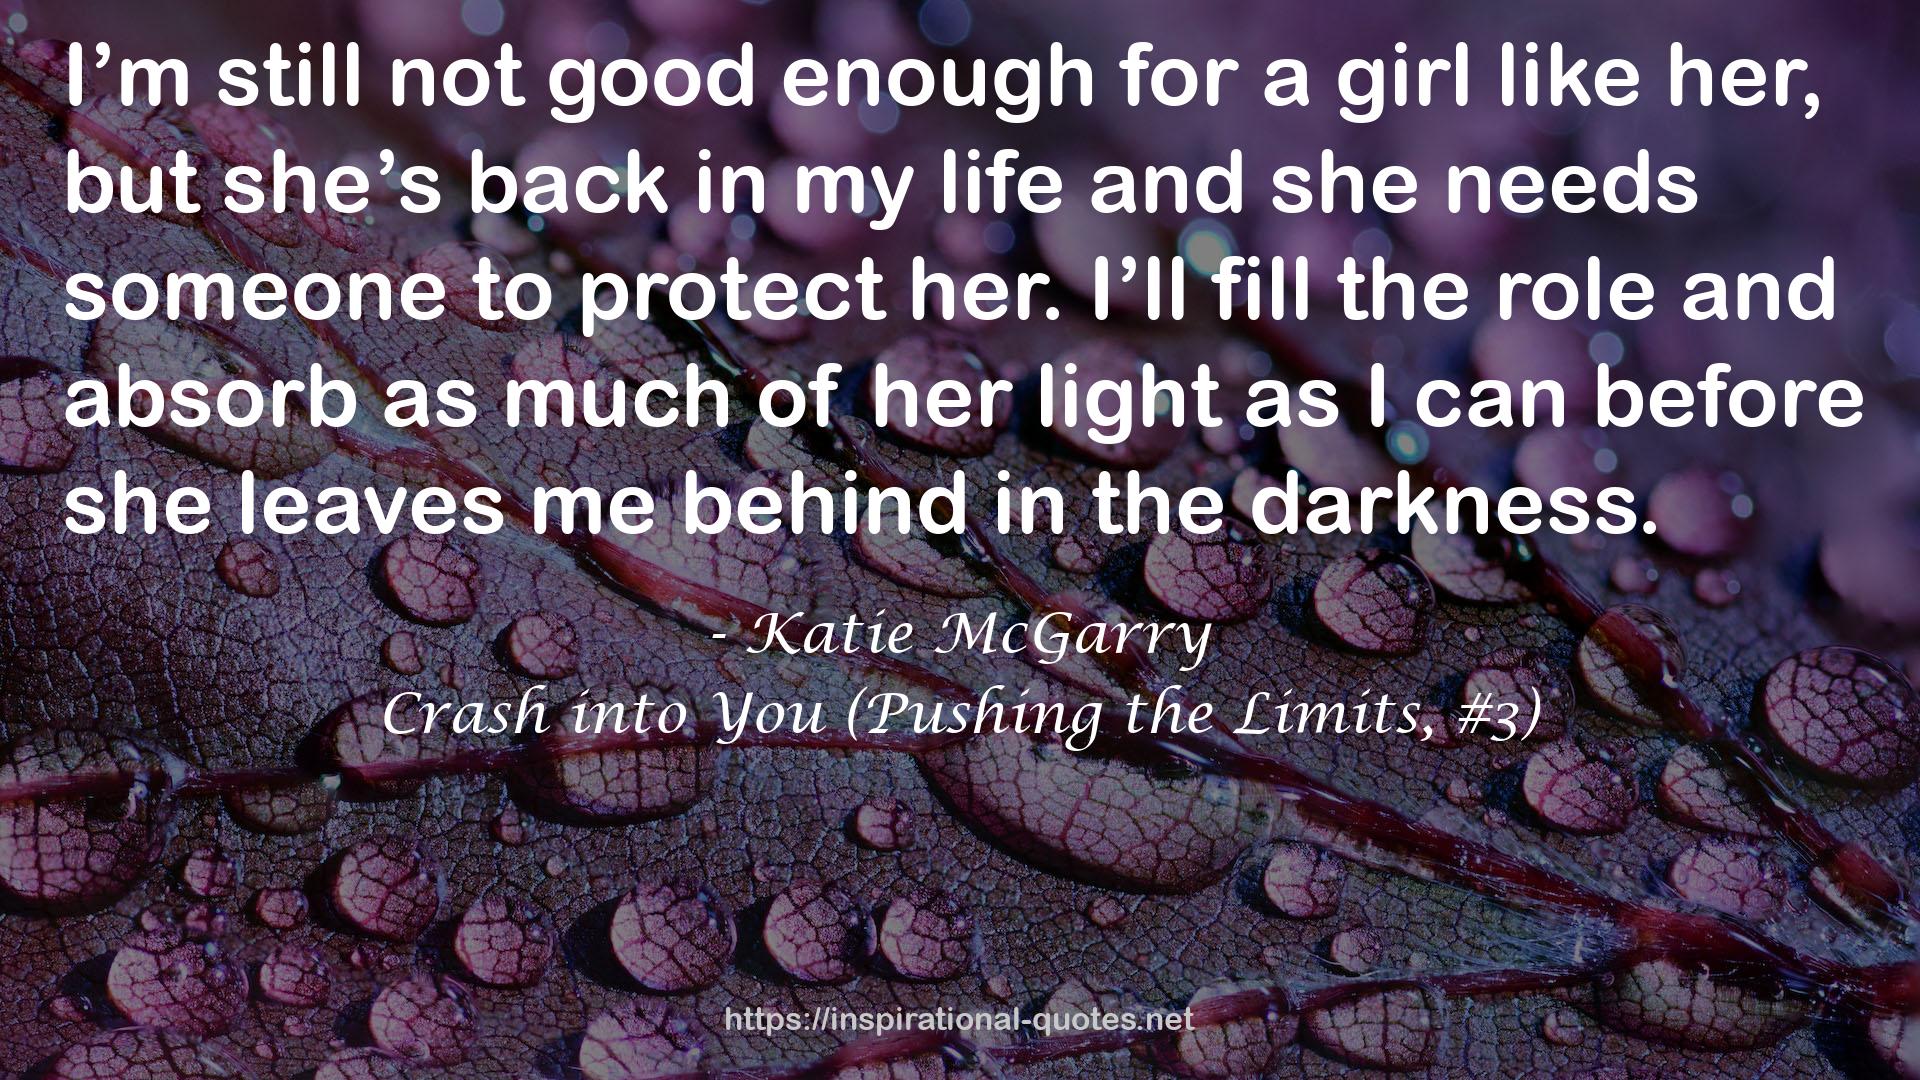 Crash into You (Pushing the Limits, #3) QUOTES